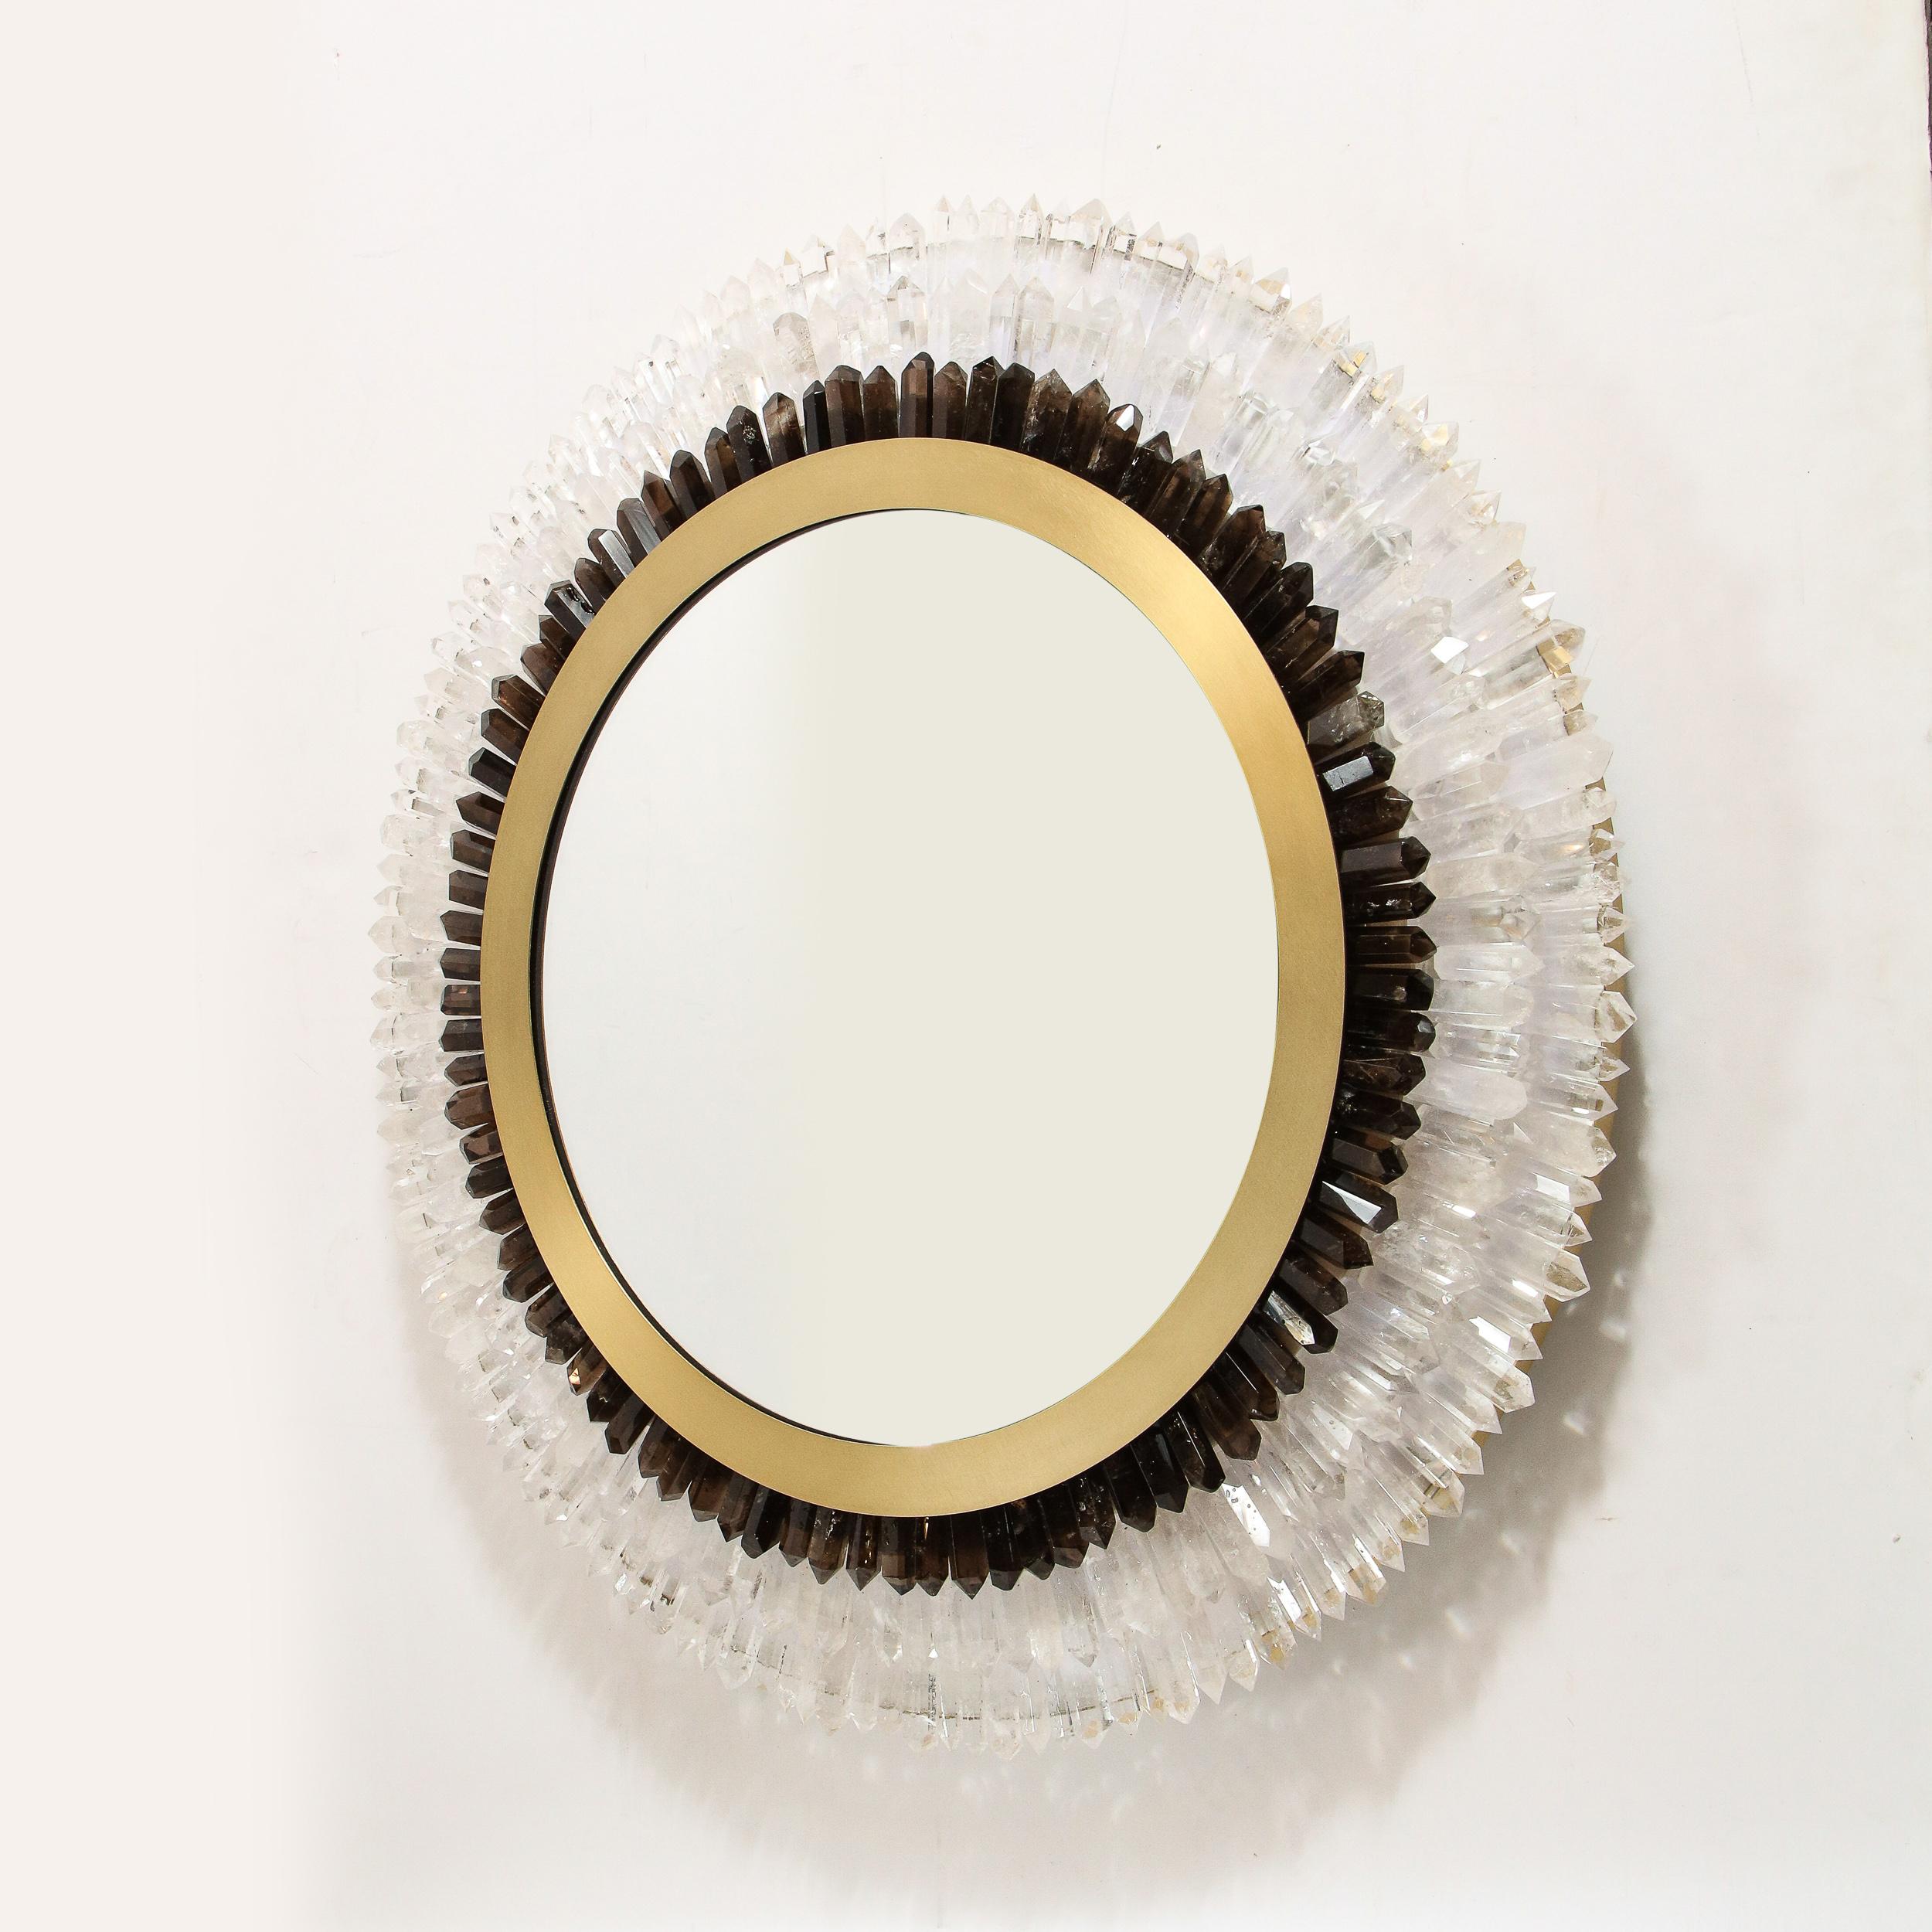 Modernist Brushed Brass, White & Smoked Rock Crystal Circular Wall Mirror For Sale 3